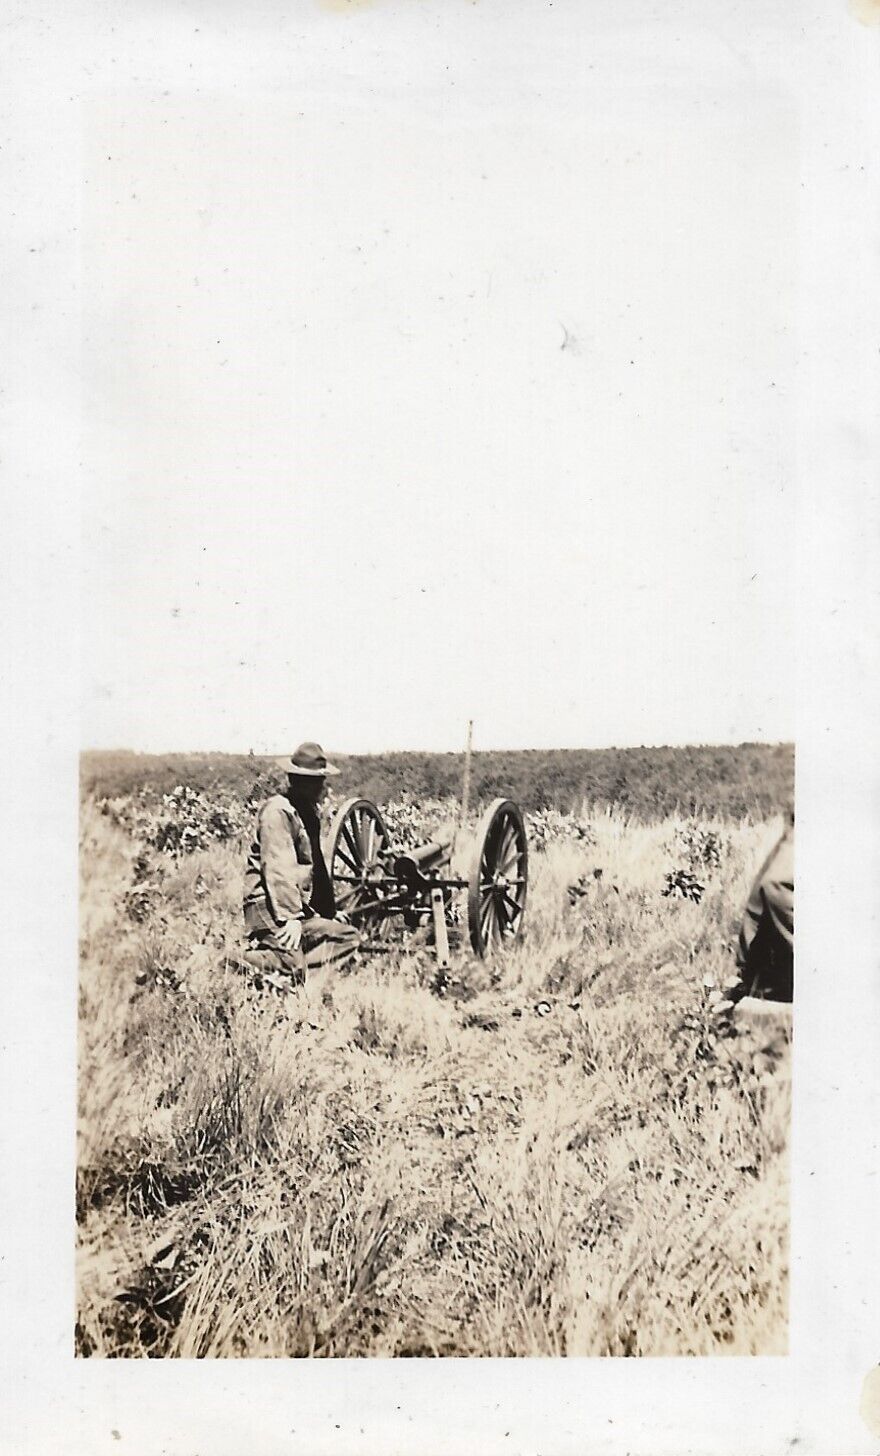 US Soldier Photograph Artillery Cannon Post WWI US Vintage Military 3 x 4 7/8